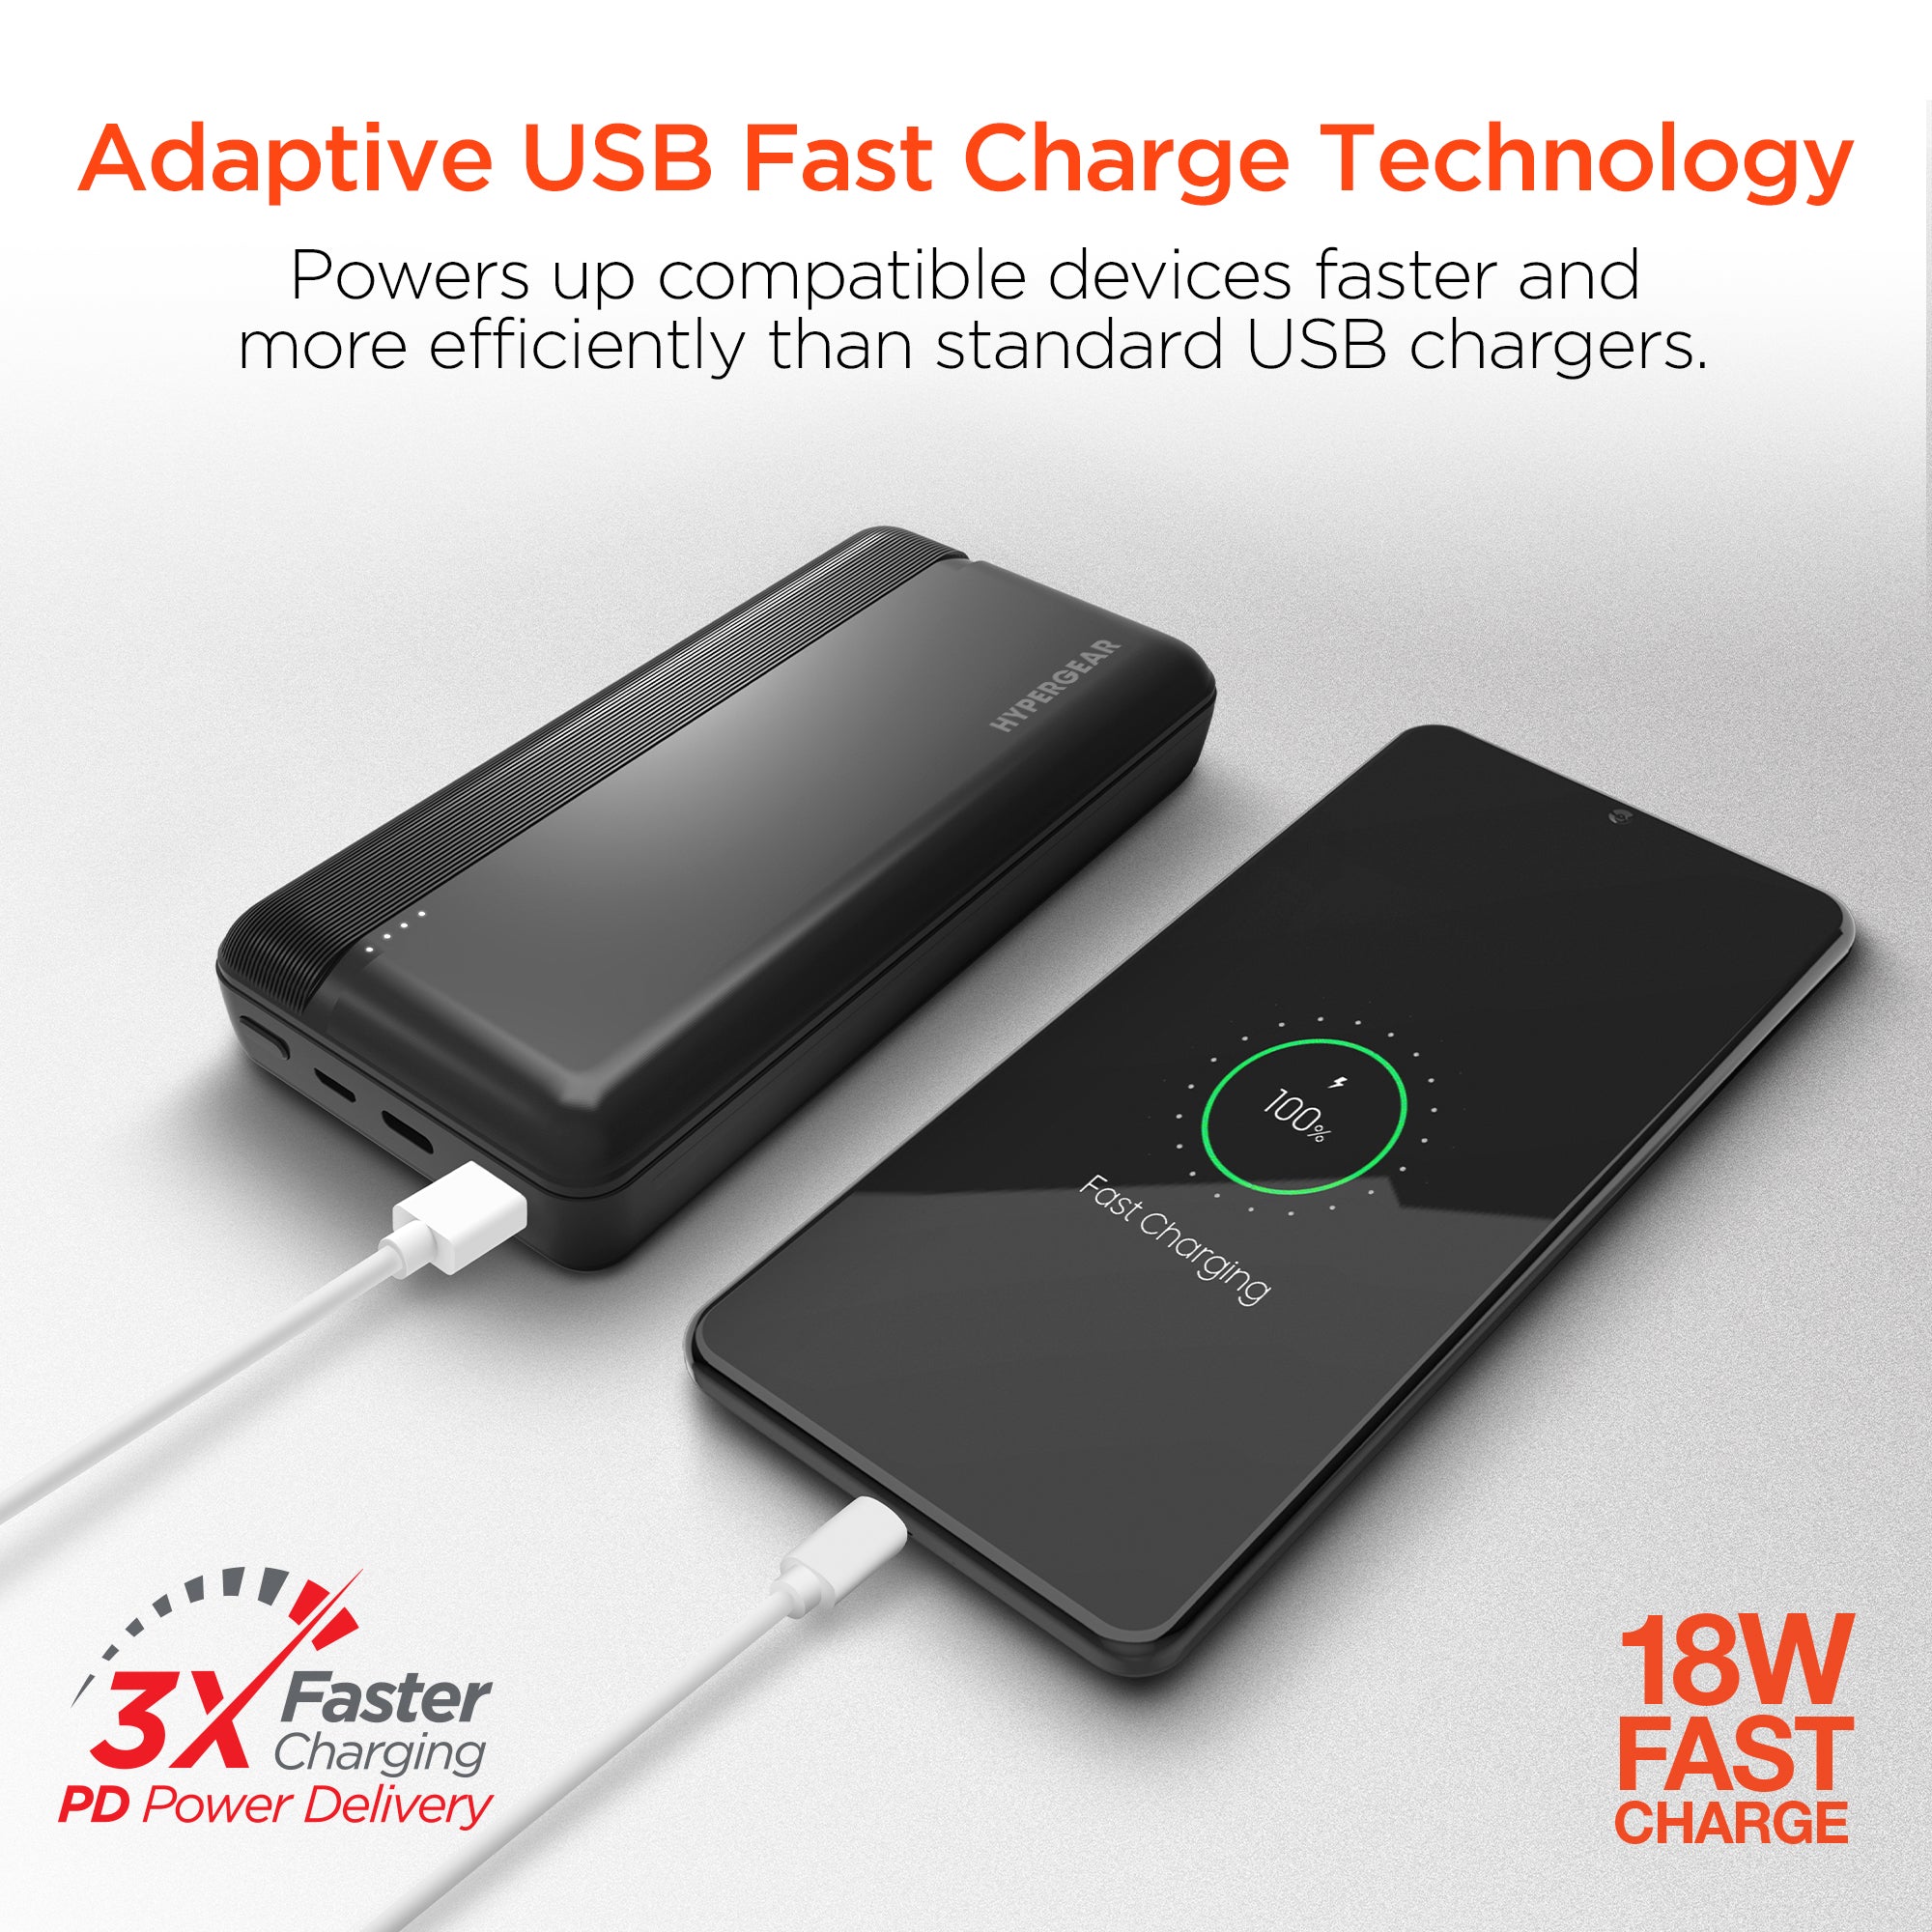 Anker PowerCore+ 10000mAh Power Bank with Built-in Lightning Connector -  Black  Portable Charger for iPhone X, iPad, Type C Devices in the Mobile  Device Chargers department at